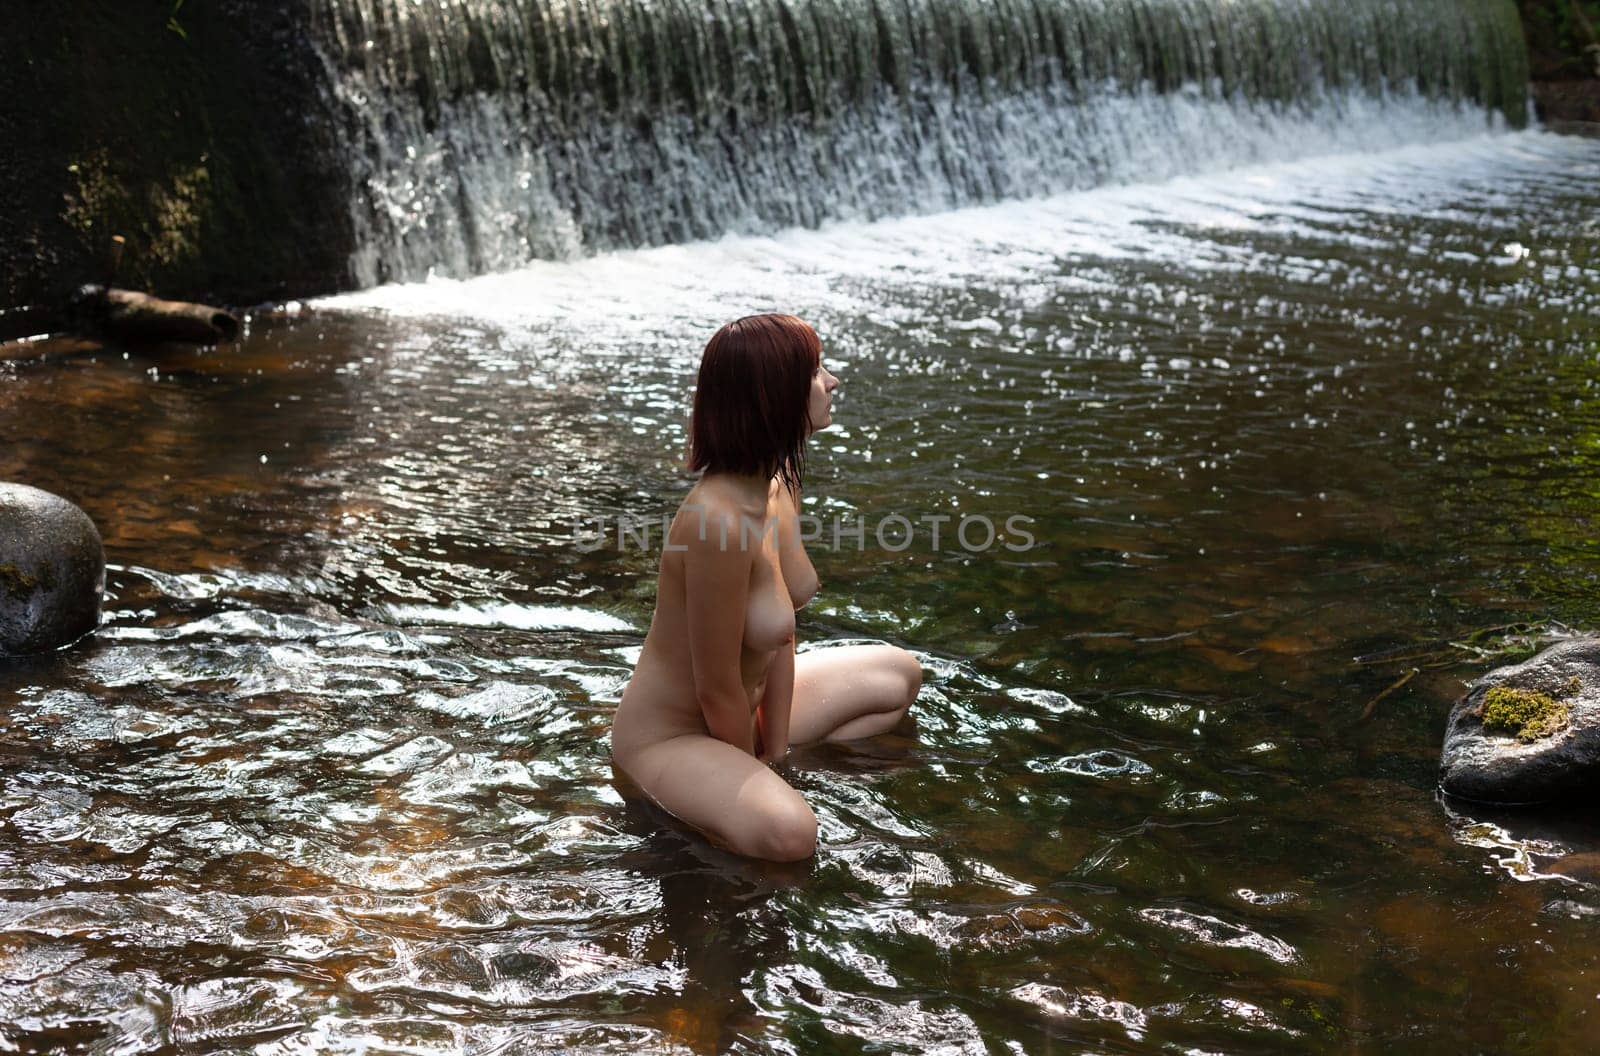 Young nude woman near a forest stream with a waterfall by palinchak